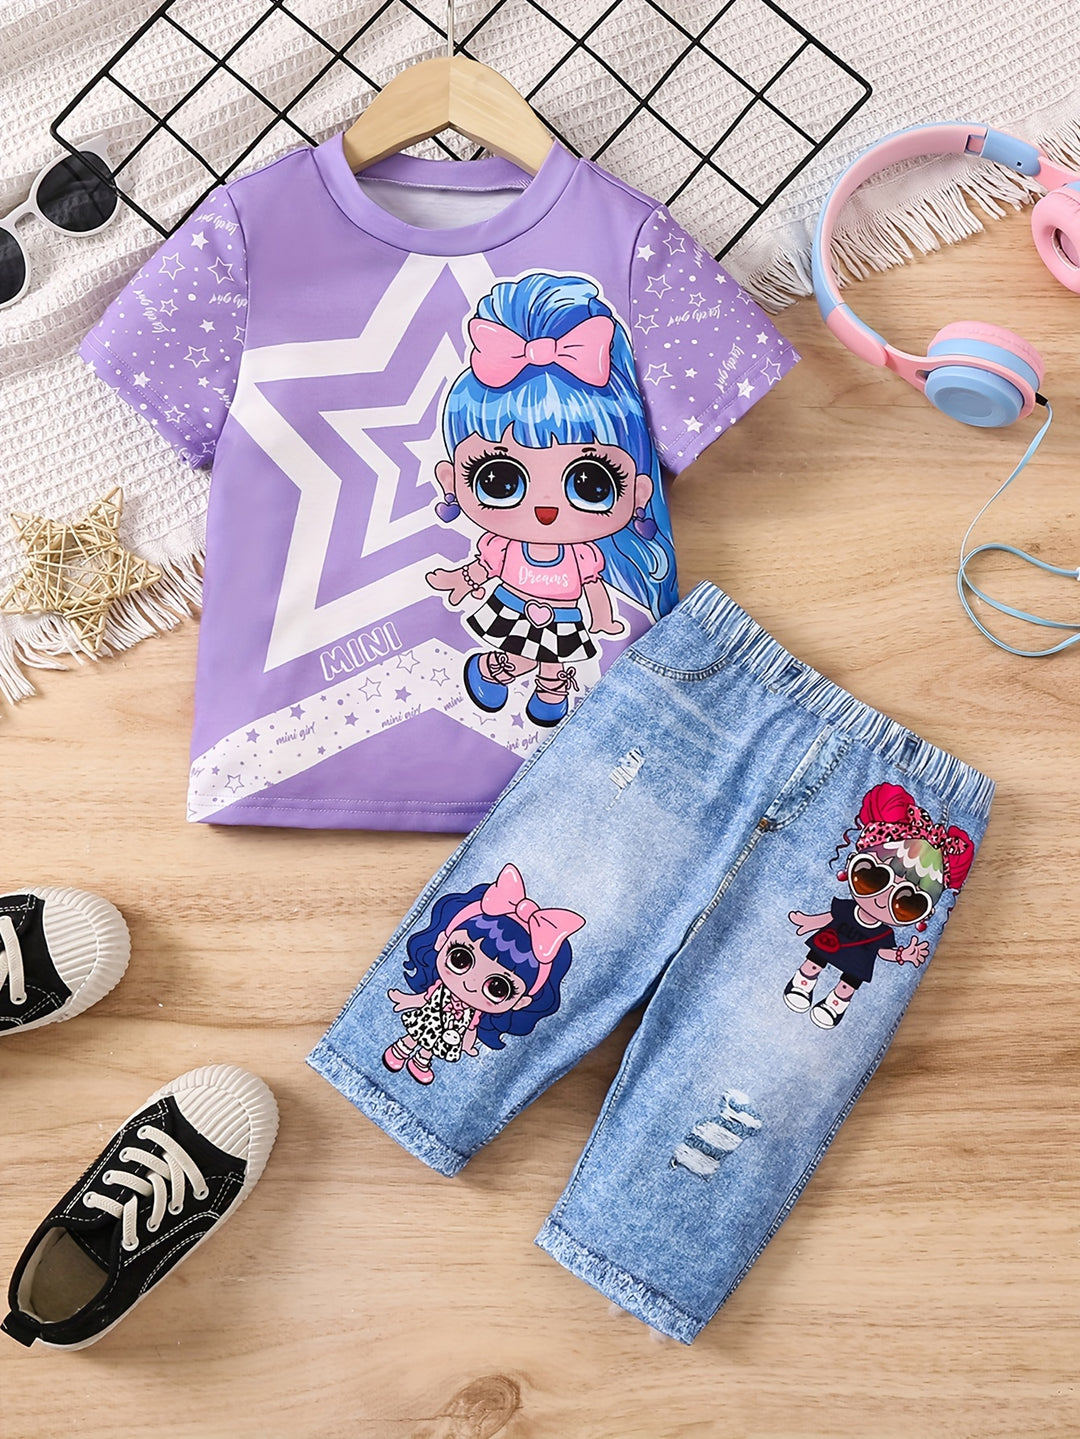 Girls Short Sleeve Star Girl Cartoon T-Shirt and Shorts Outfits - Gen U Us Products